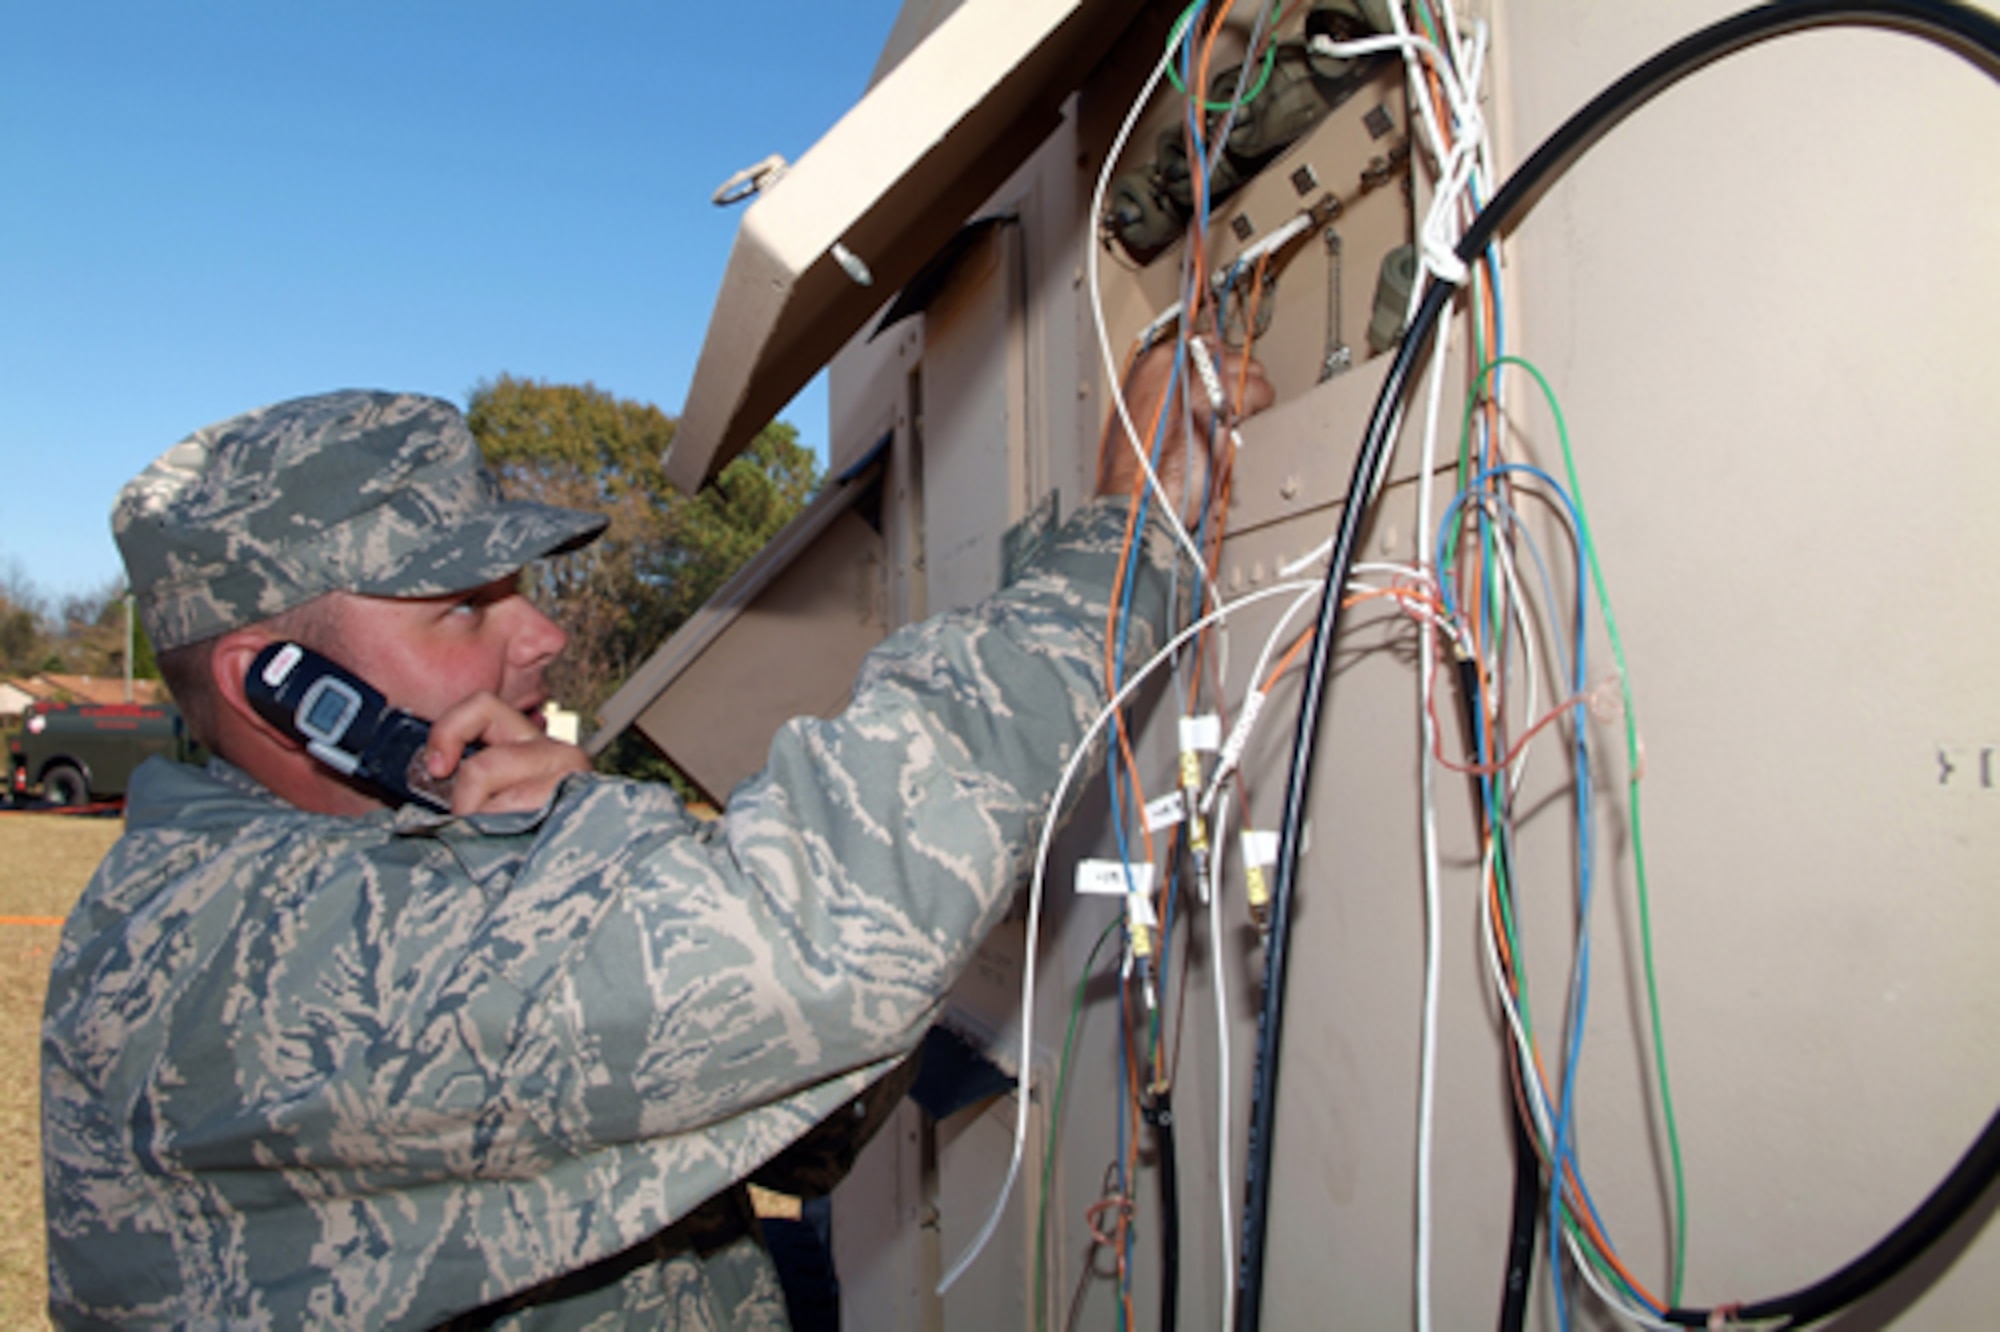 Staff Sgt. Trent Lundell, 54th Combat Communications Squadron, attaches a fiber optics connection to the TRC-170 access panel to configure a loopback connectivity test to the distant end.  U.S. Air Force photos by Tommie Horton